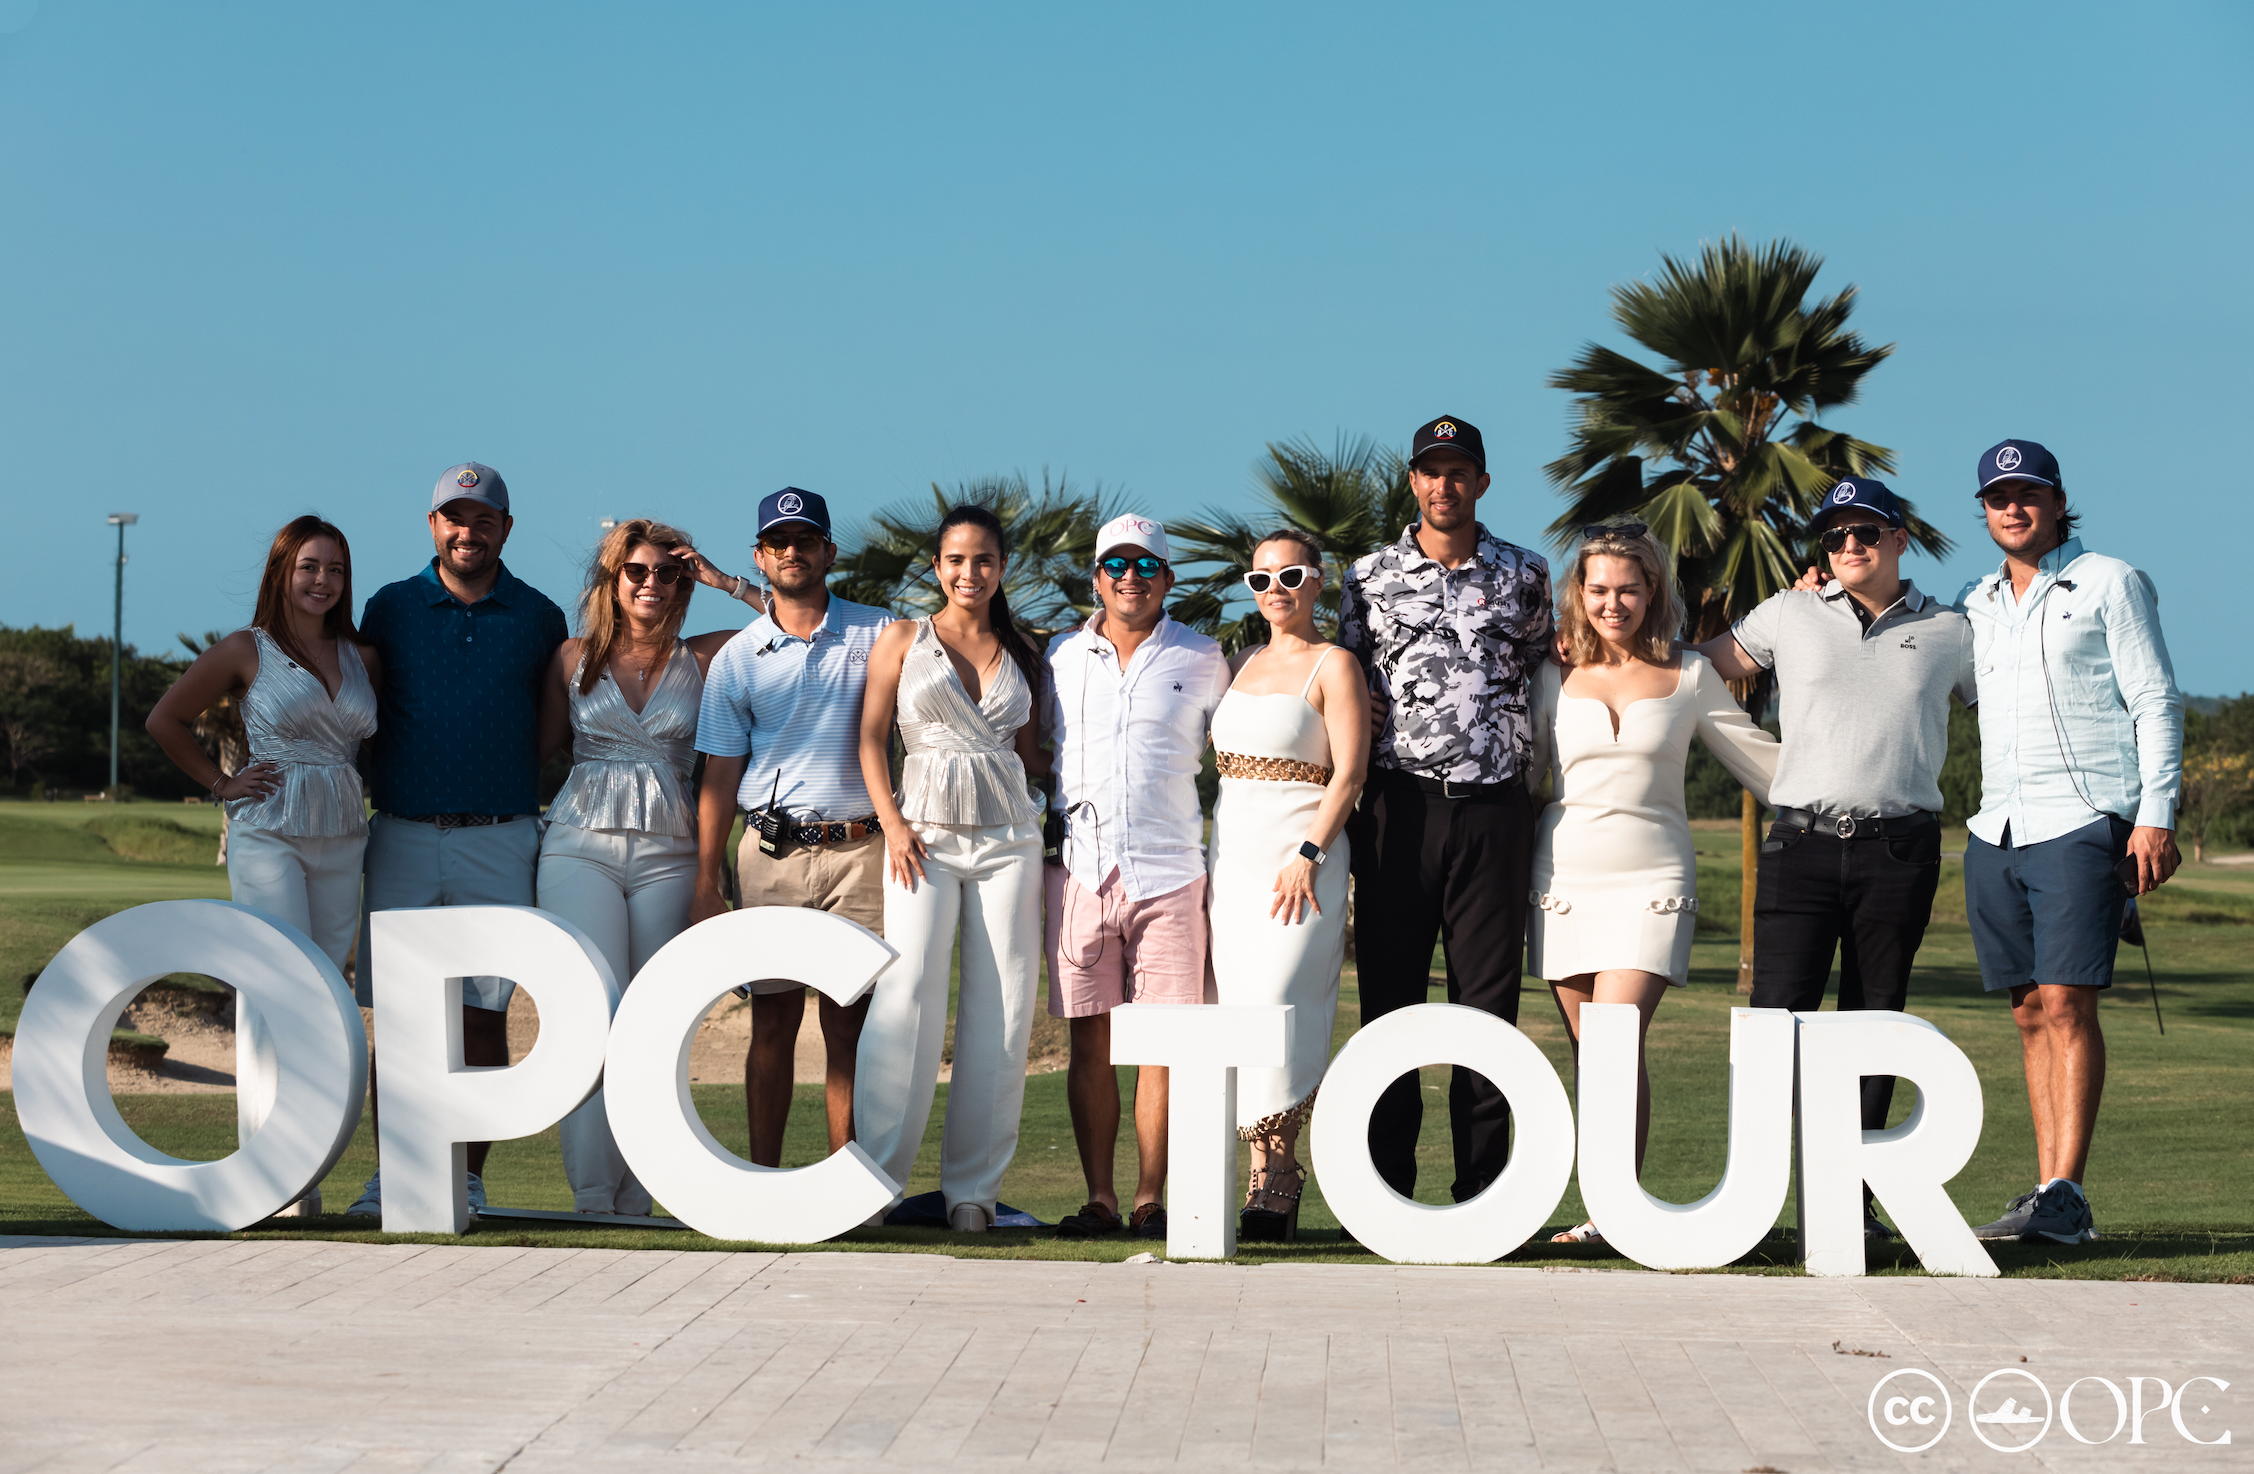 OPC Tour Golf Tournament in Colombia